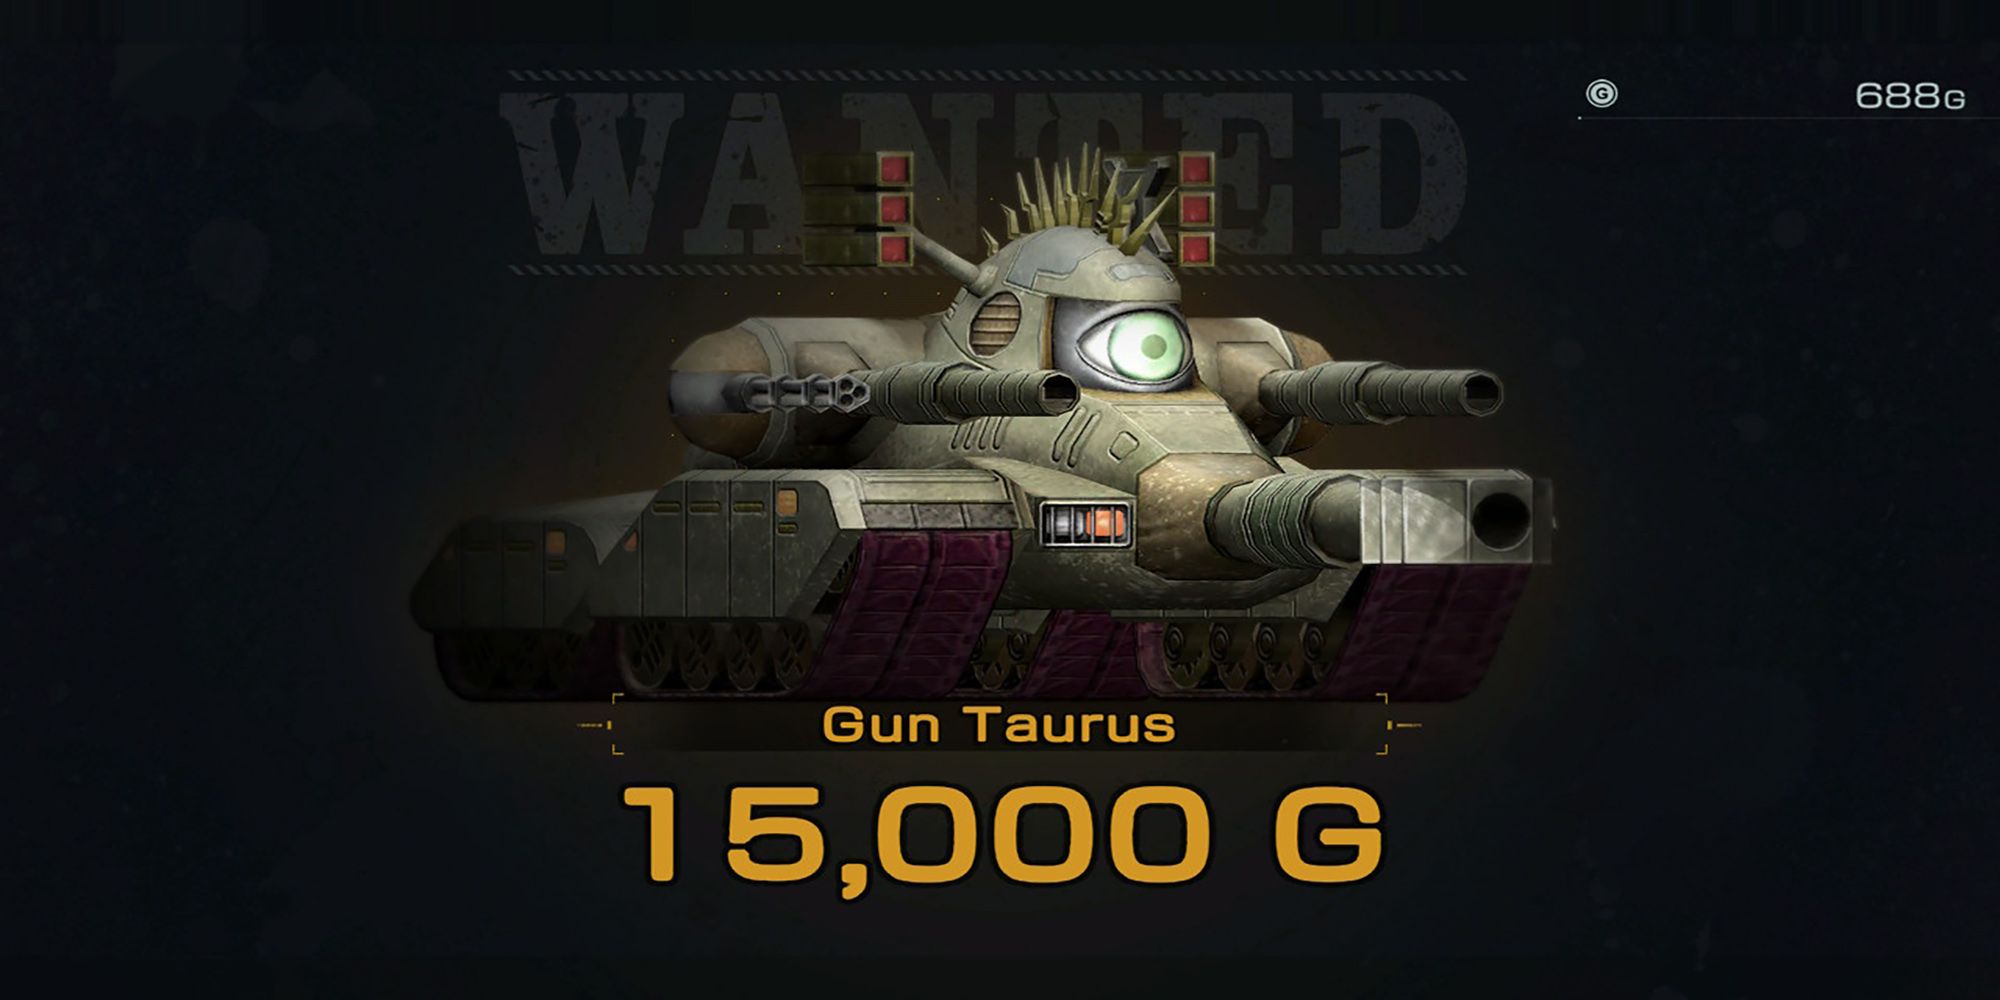 A Wanted poster displays the Gun Taurus, along with a 15,000 G bounty in Metal Max Xeno Reborn.